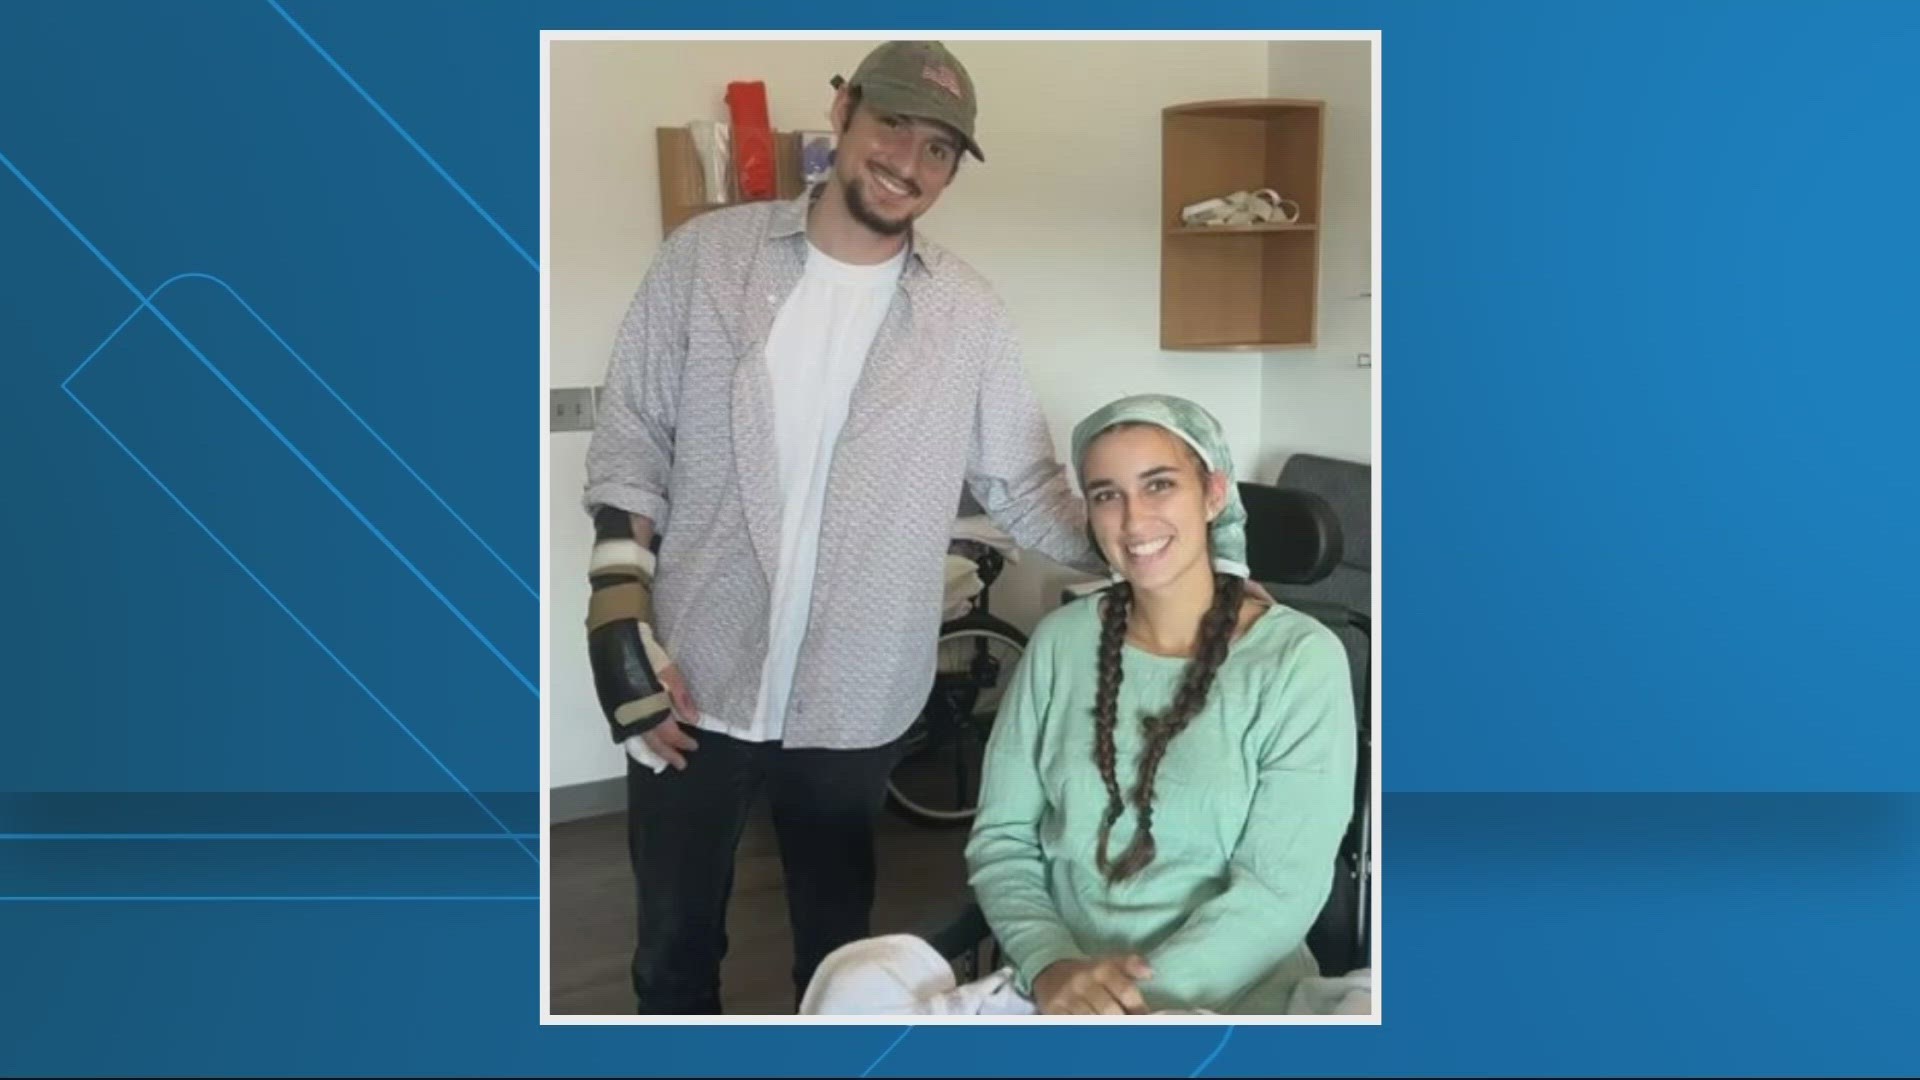 It's the first photograph posted of Madison Schemitz since she was stabbed 15 times by her former boyfriend outside a Ponte Vedra restaurant.